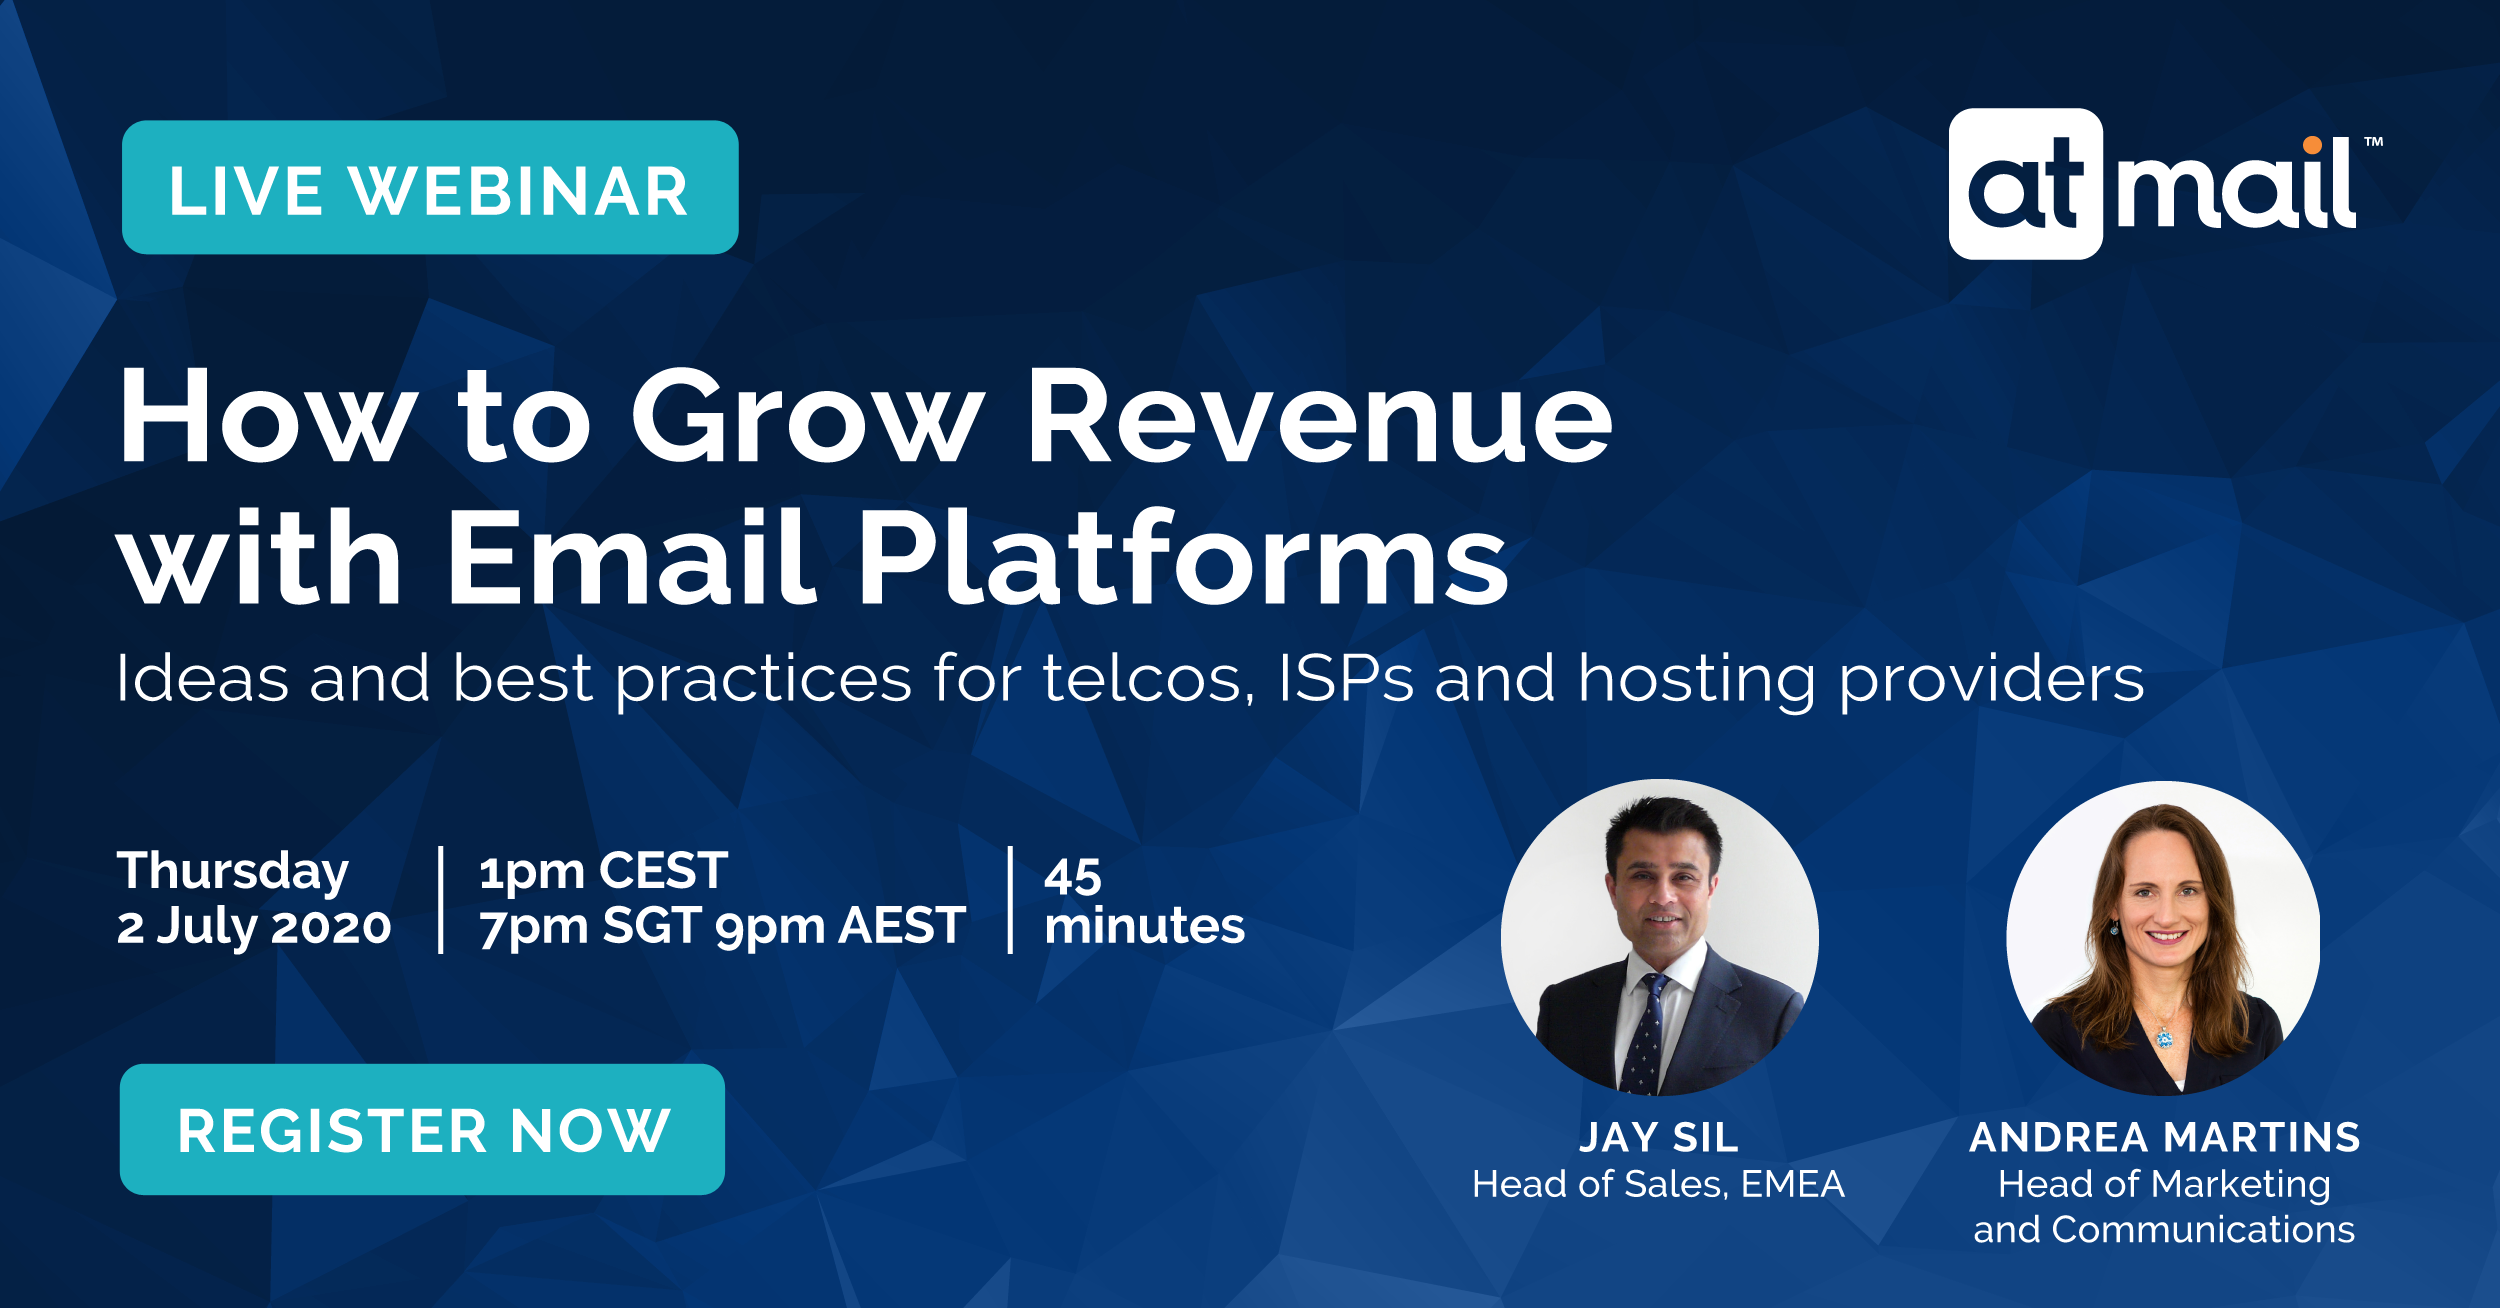 How to Grow Revenue with Email Platforms - Jay Sil - Andrea Martins - atmail email experts - cloud email hosting for telcos, ISPs and hosting providers